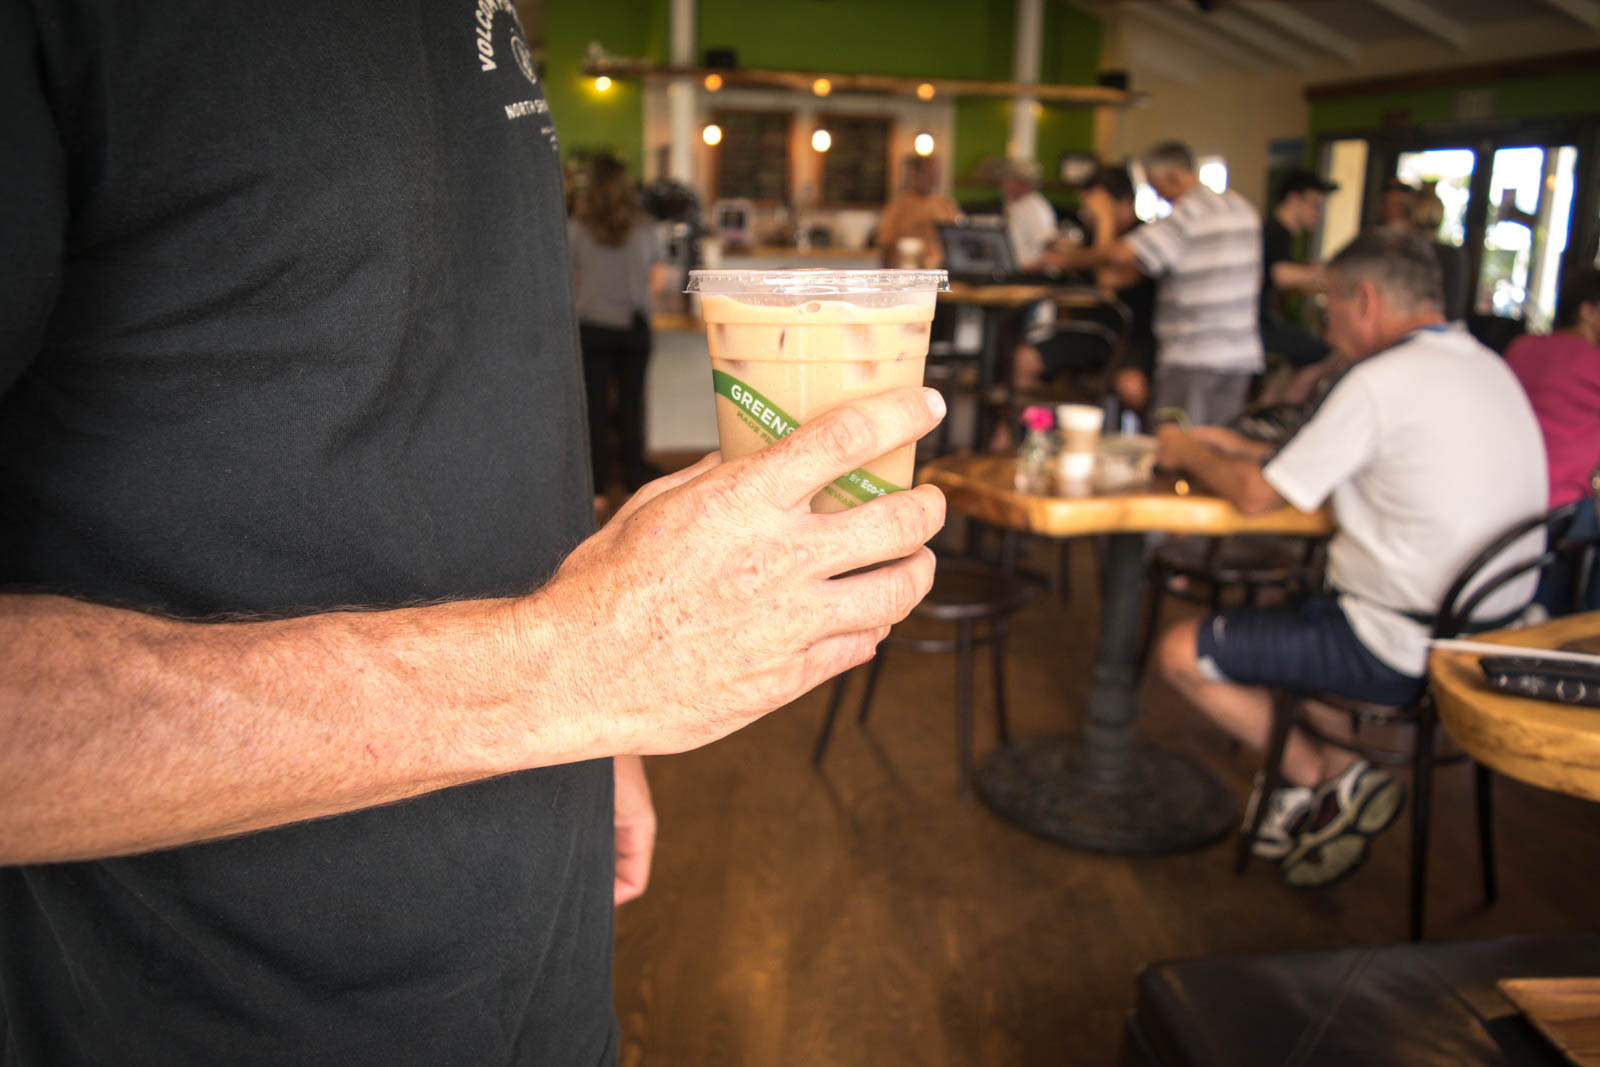 All of our to-go containers are now biodegradable and you can get a discount for brining your own cup and/or straw.&nbsp;